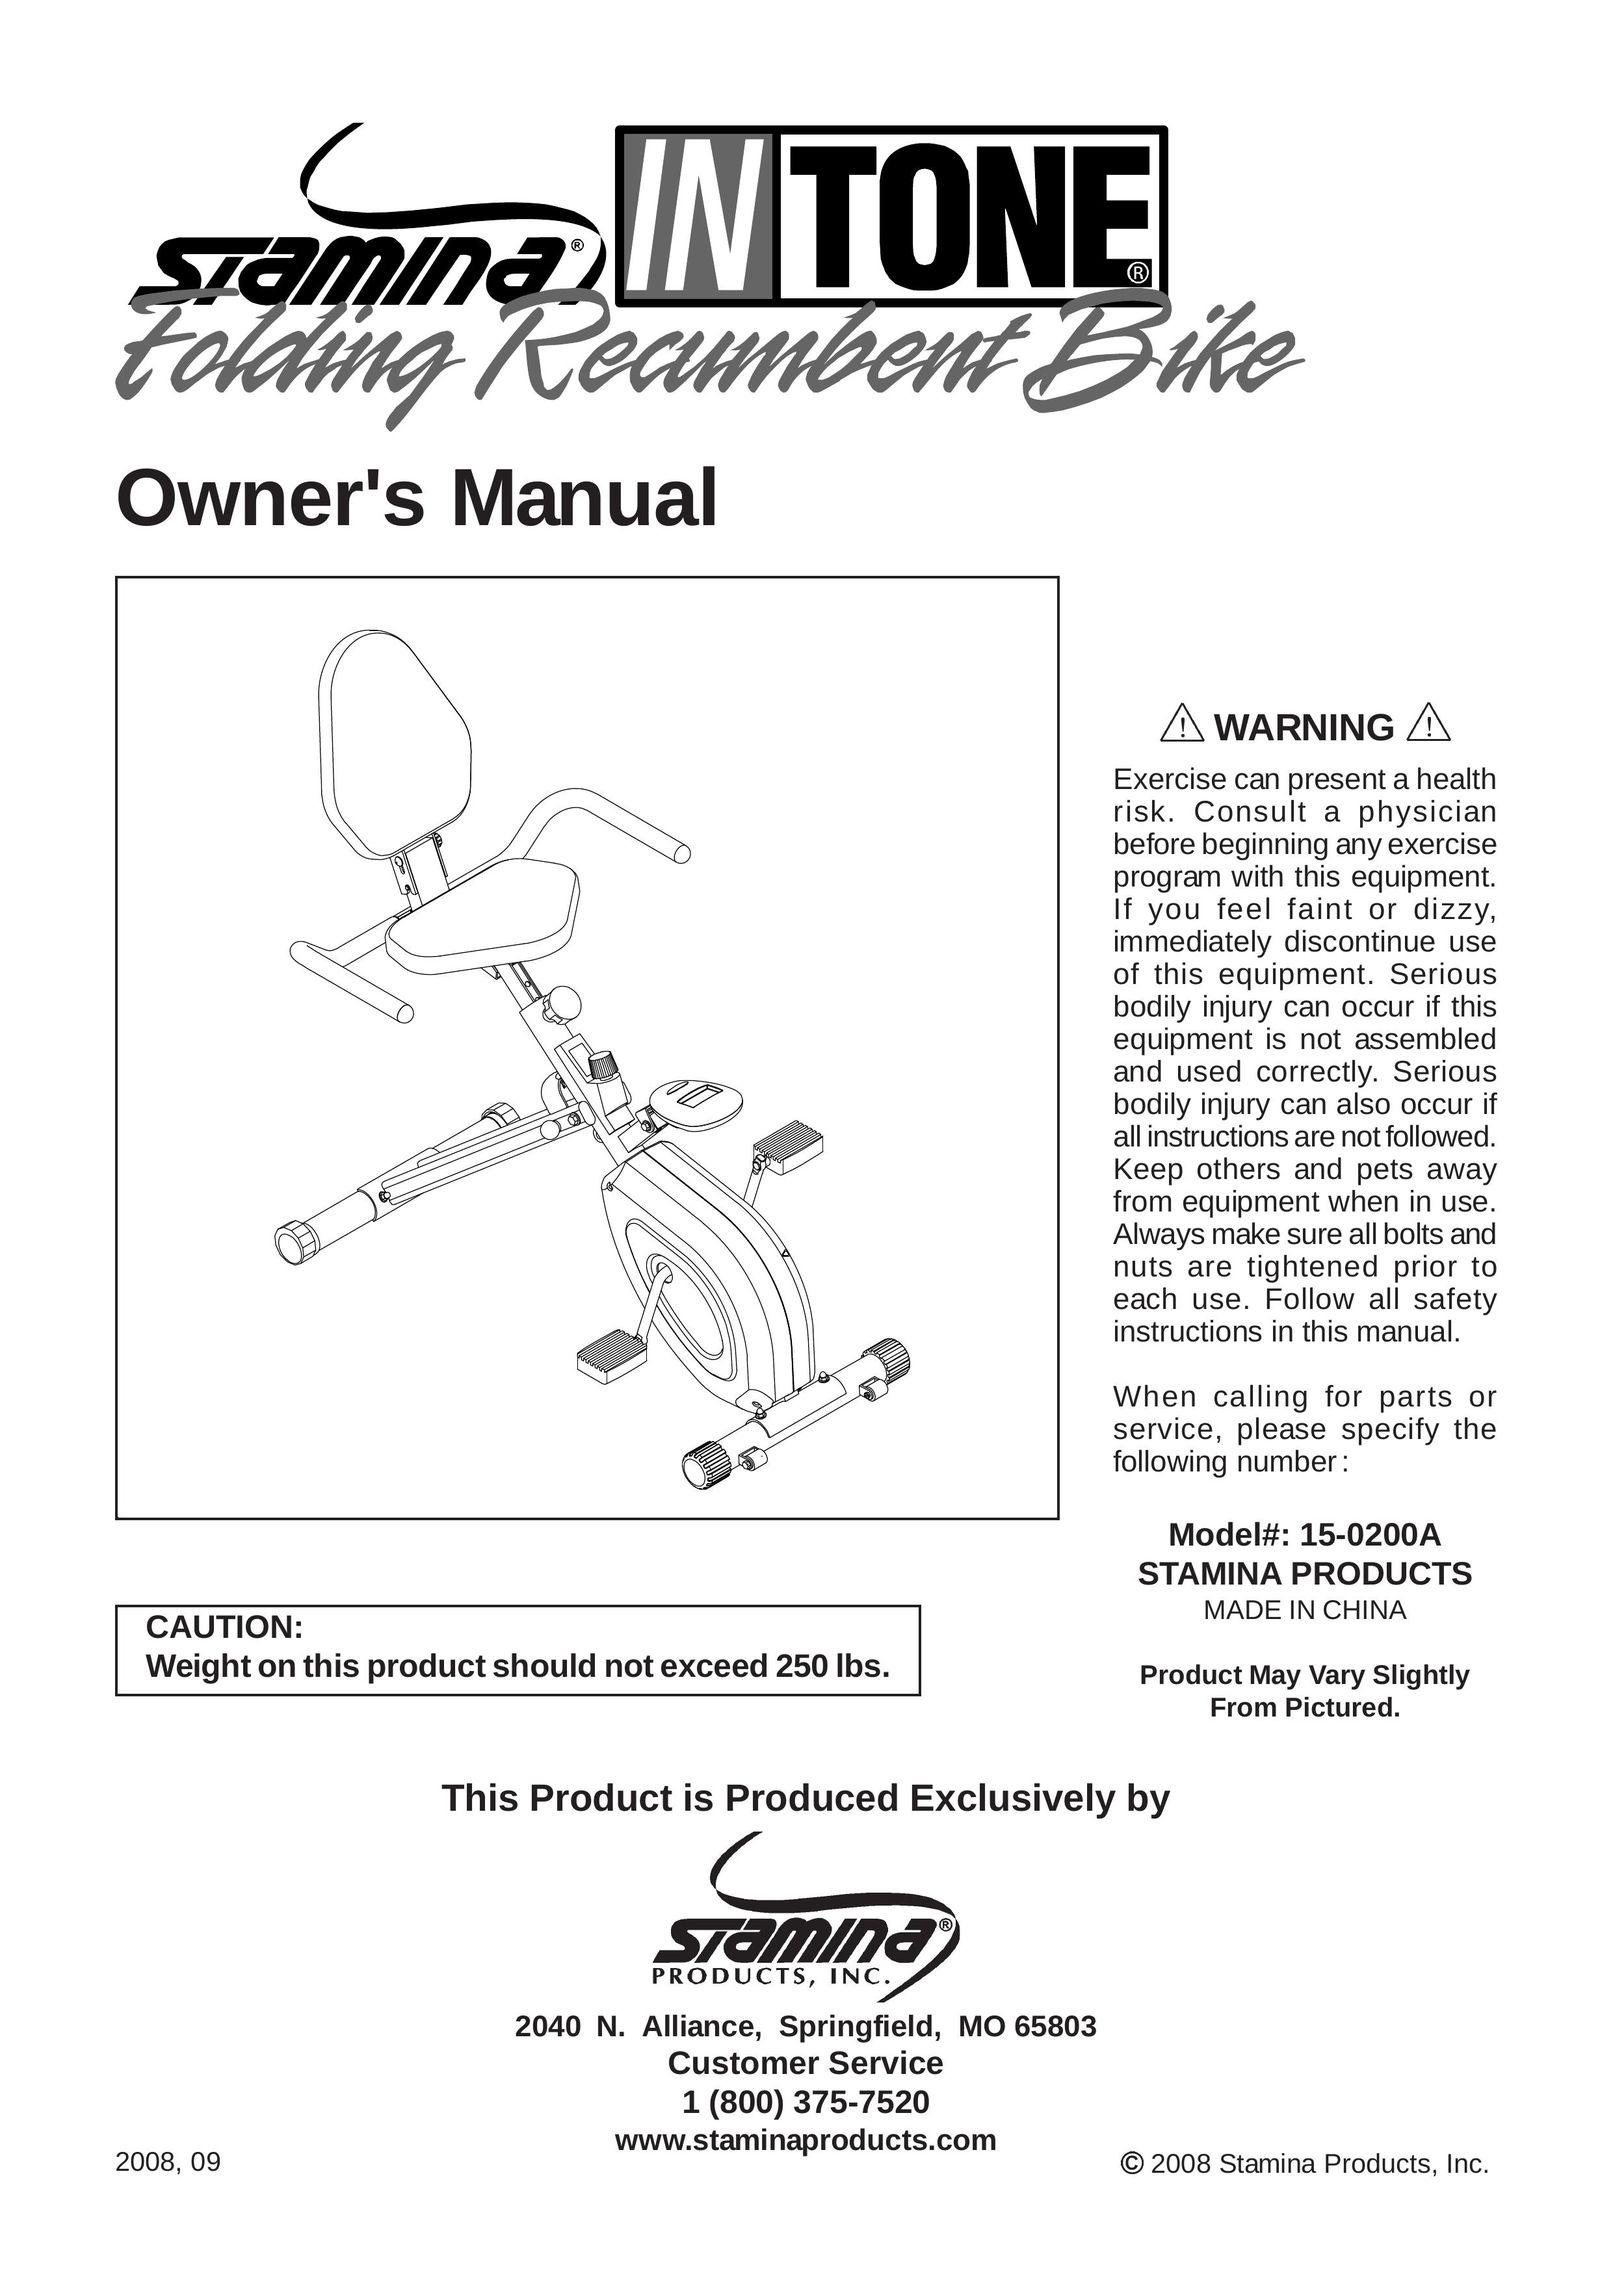 Stamina Products 15-0200A Bicycle User Manual